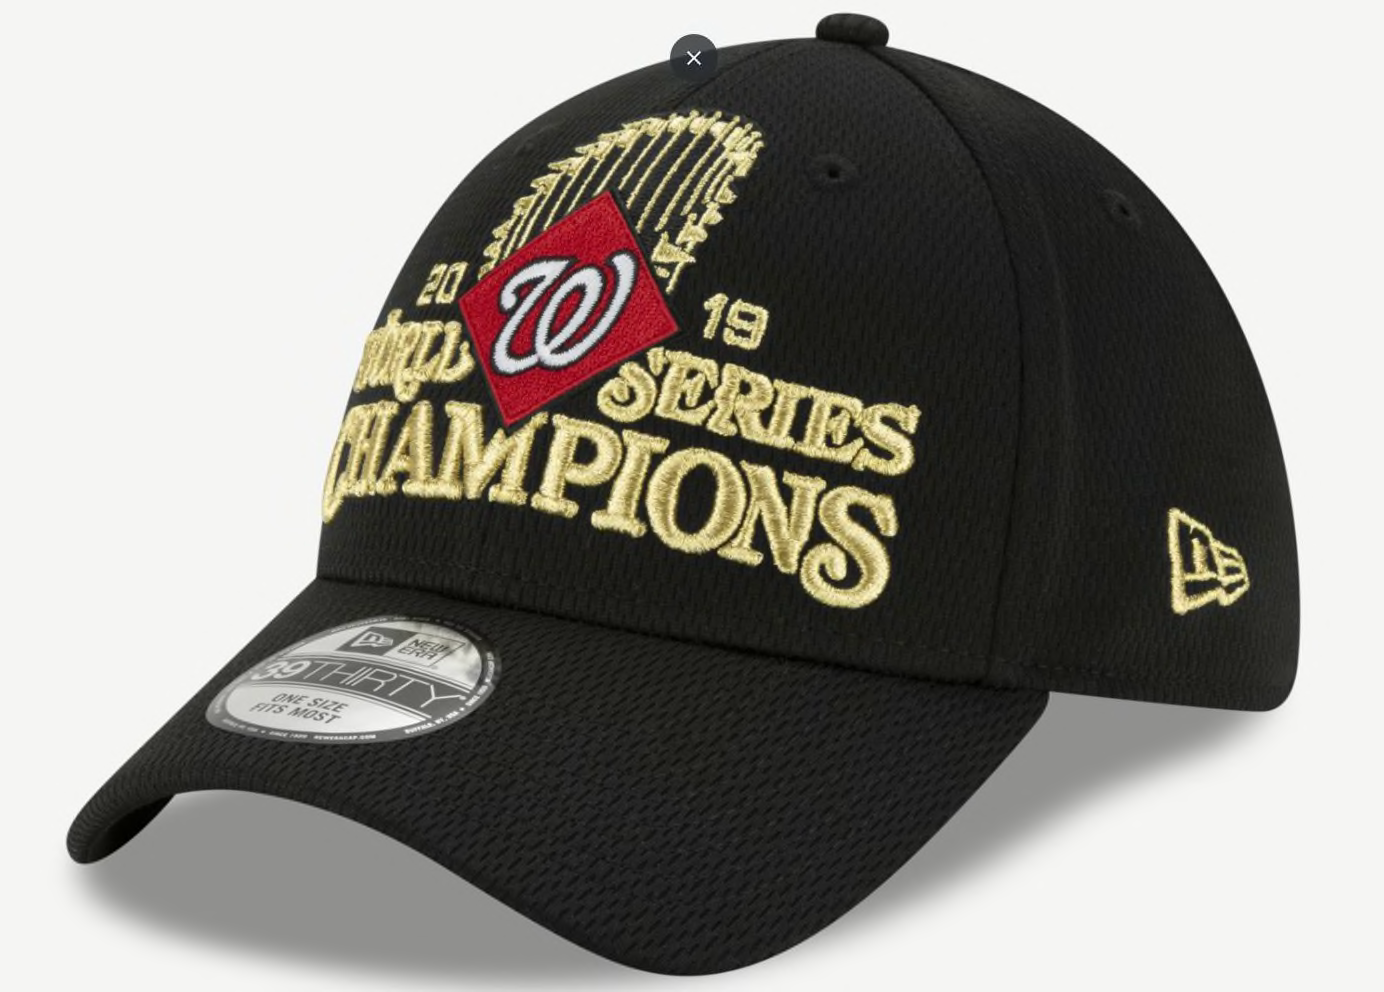 nationals world series champions gear